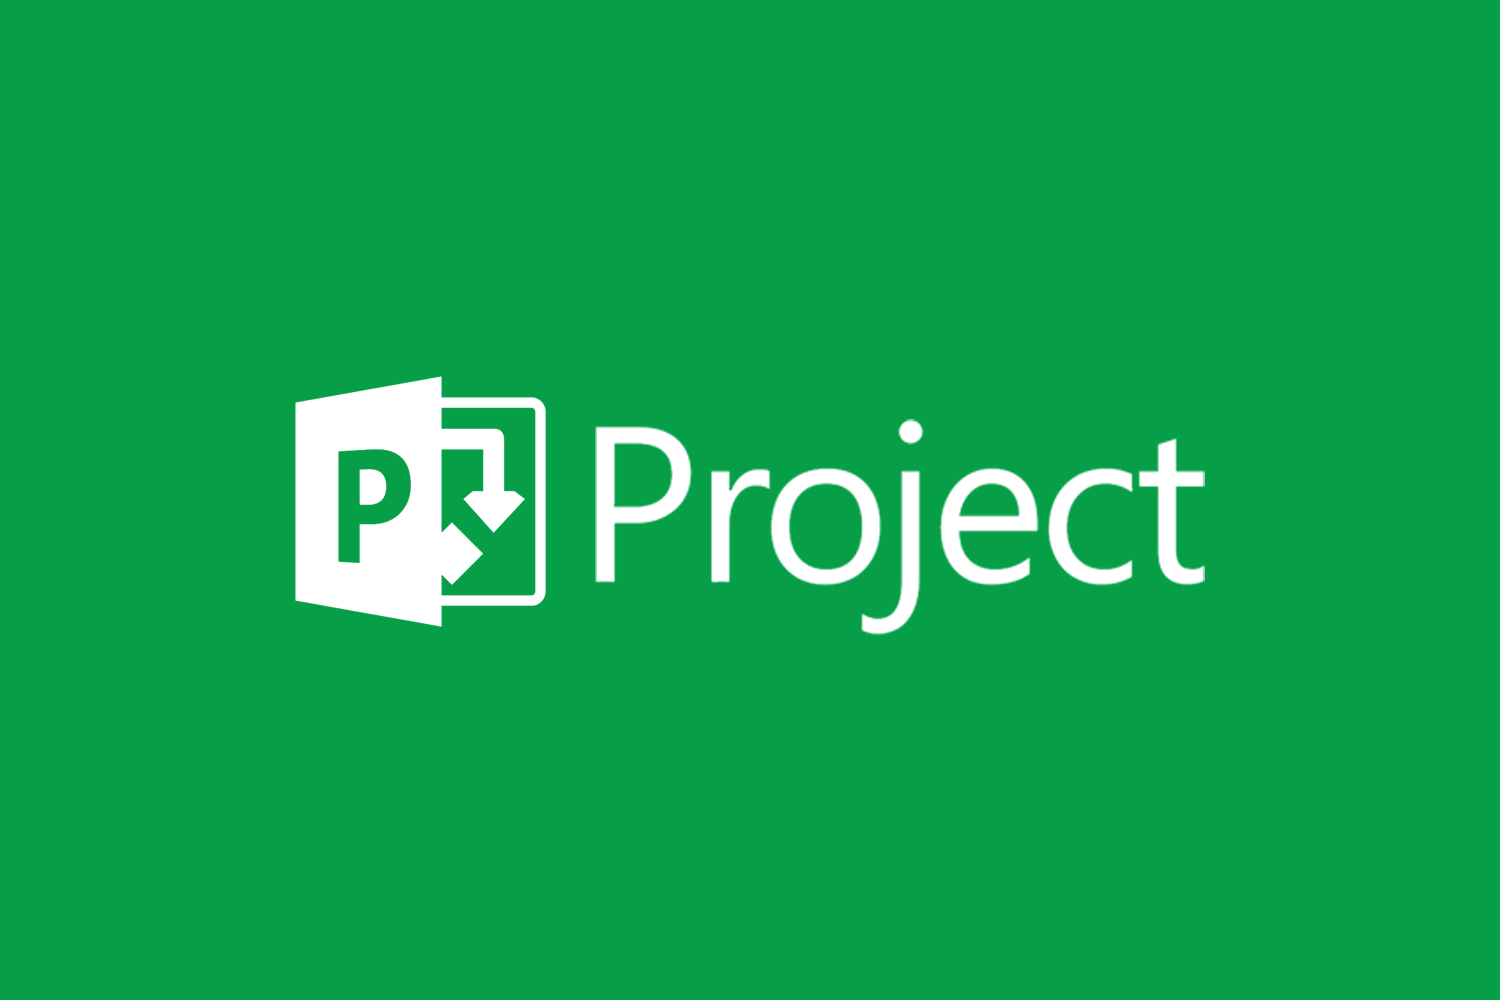 can a ms project 2016 file be read in ms project 2010